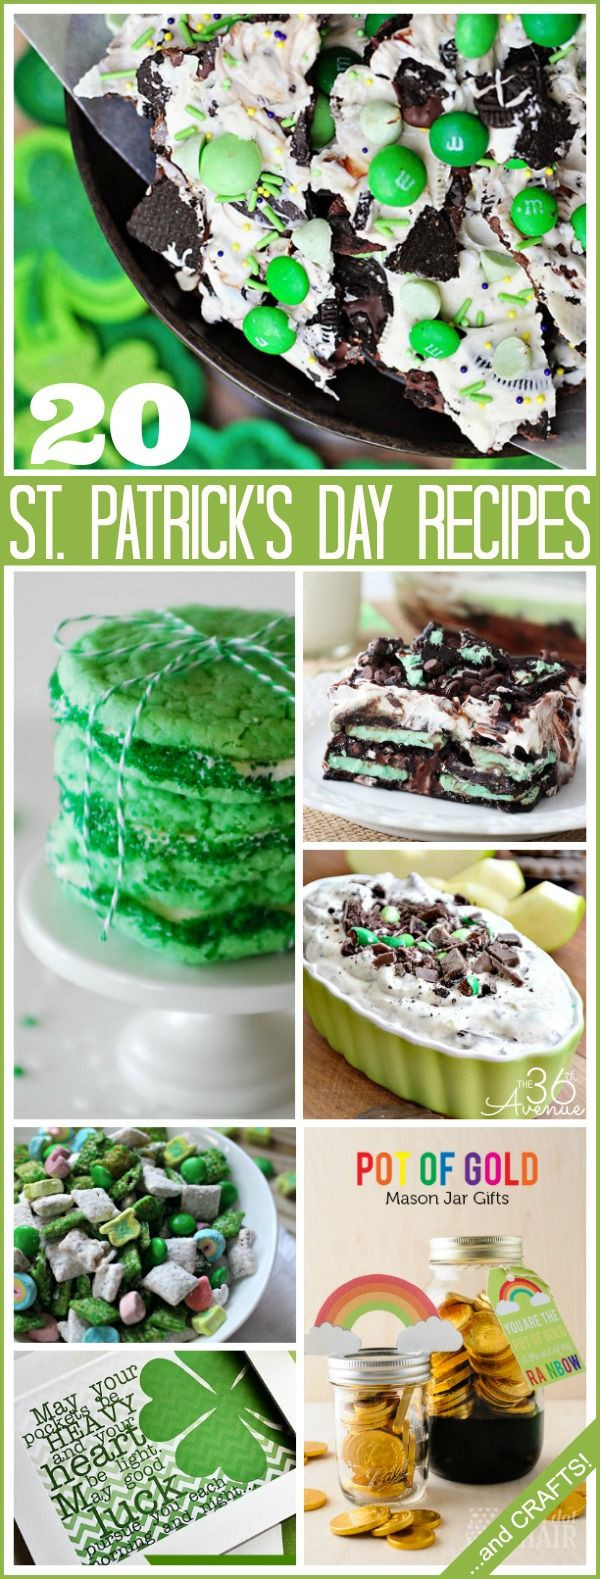 St Patrick's Day Meal Ideas
 20 St Patricks Day Recipes and Ideas